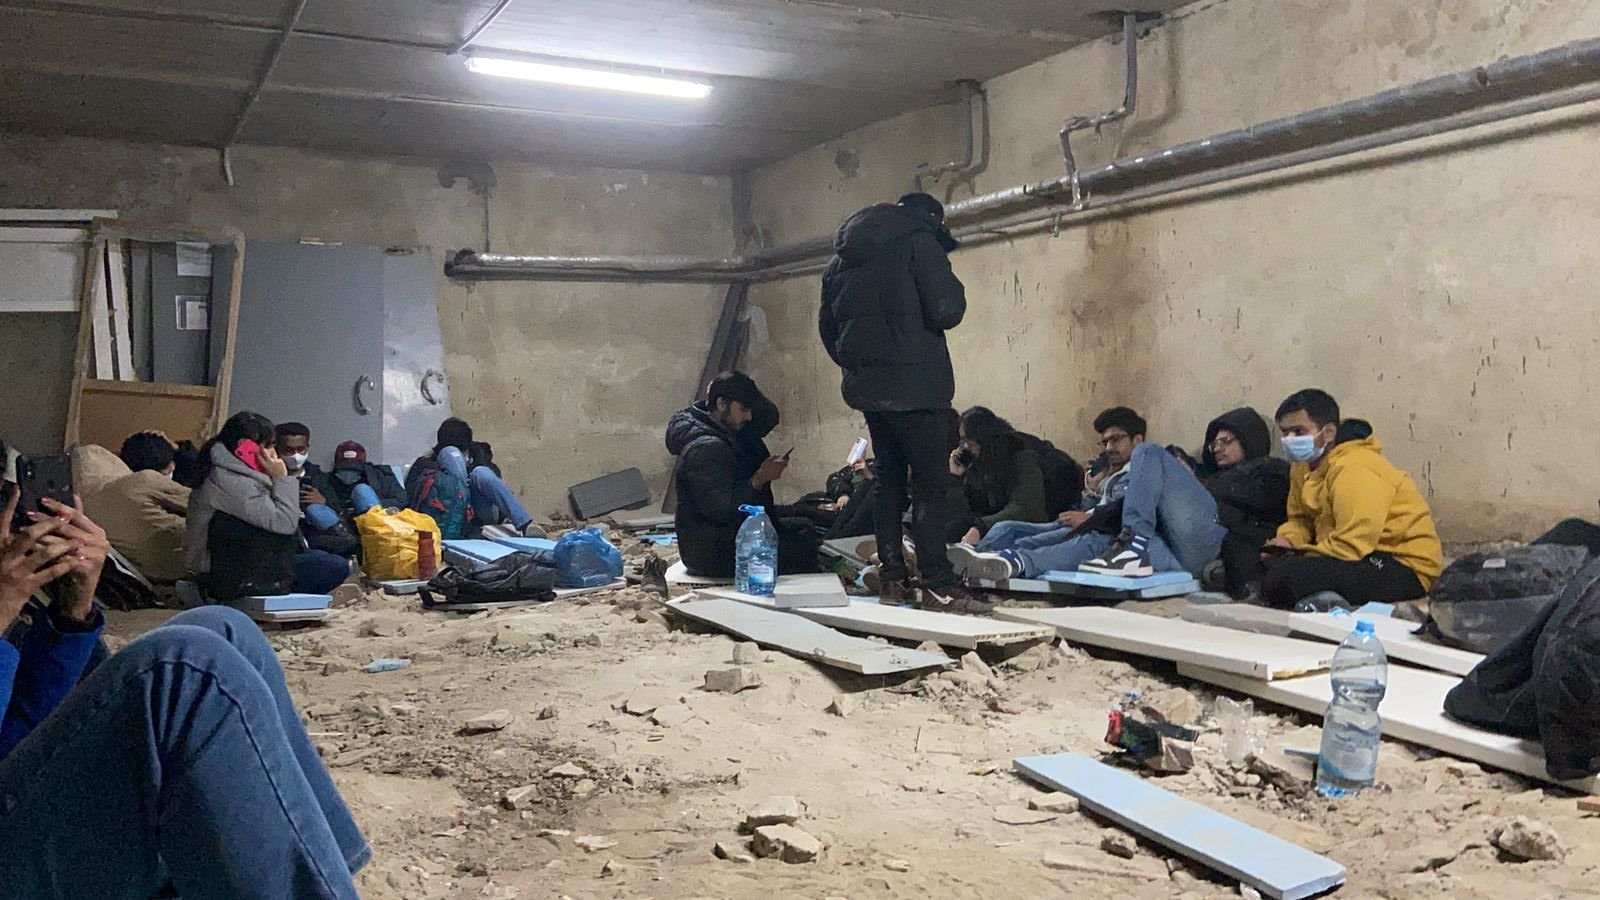 Indian students sit on wooden planks and check their phones in an underground bunker in Kharkiv, Thursday | Kwaish Thapa | By special arrangement